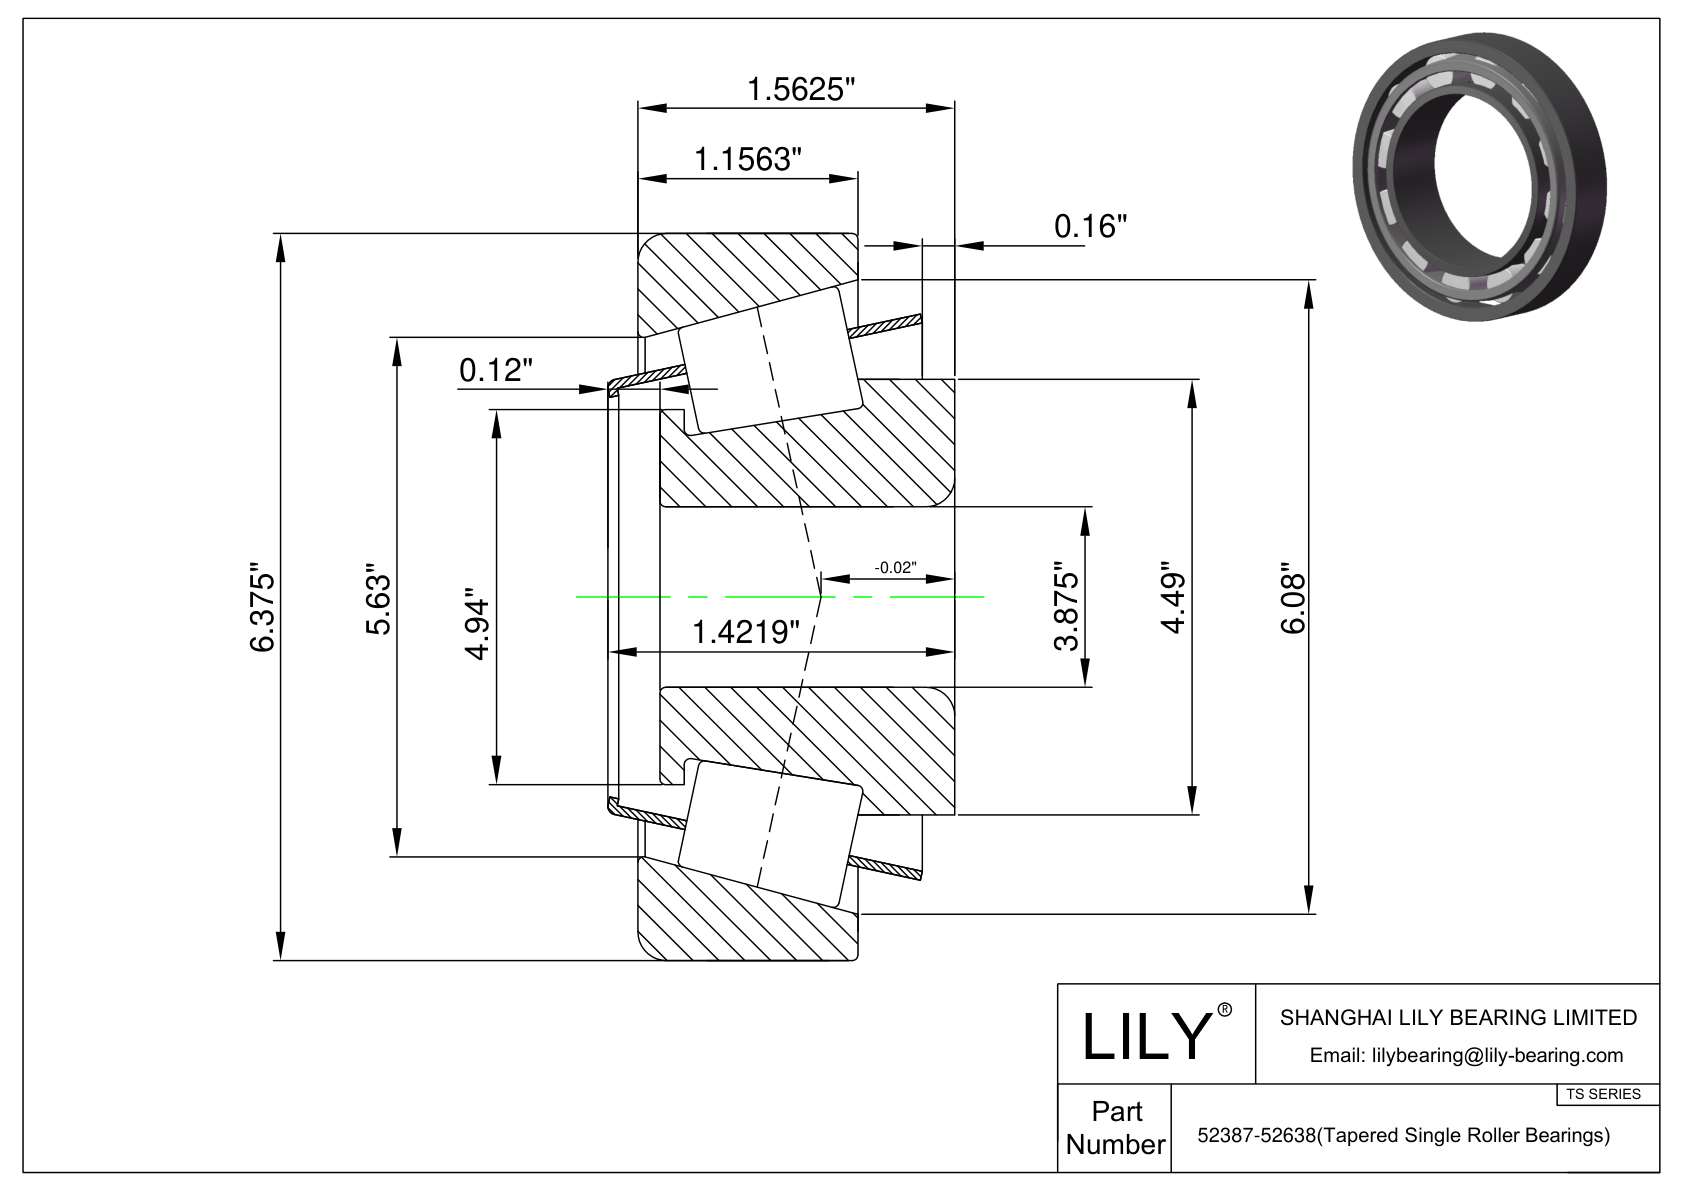 52387-52638 TS (Tapered Single Roller Bearings) (Imperial) cad drawing